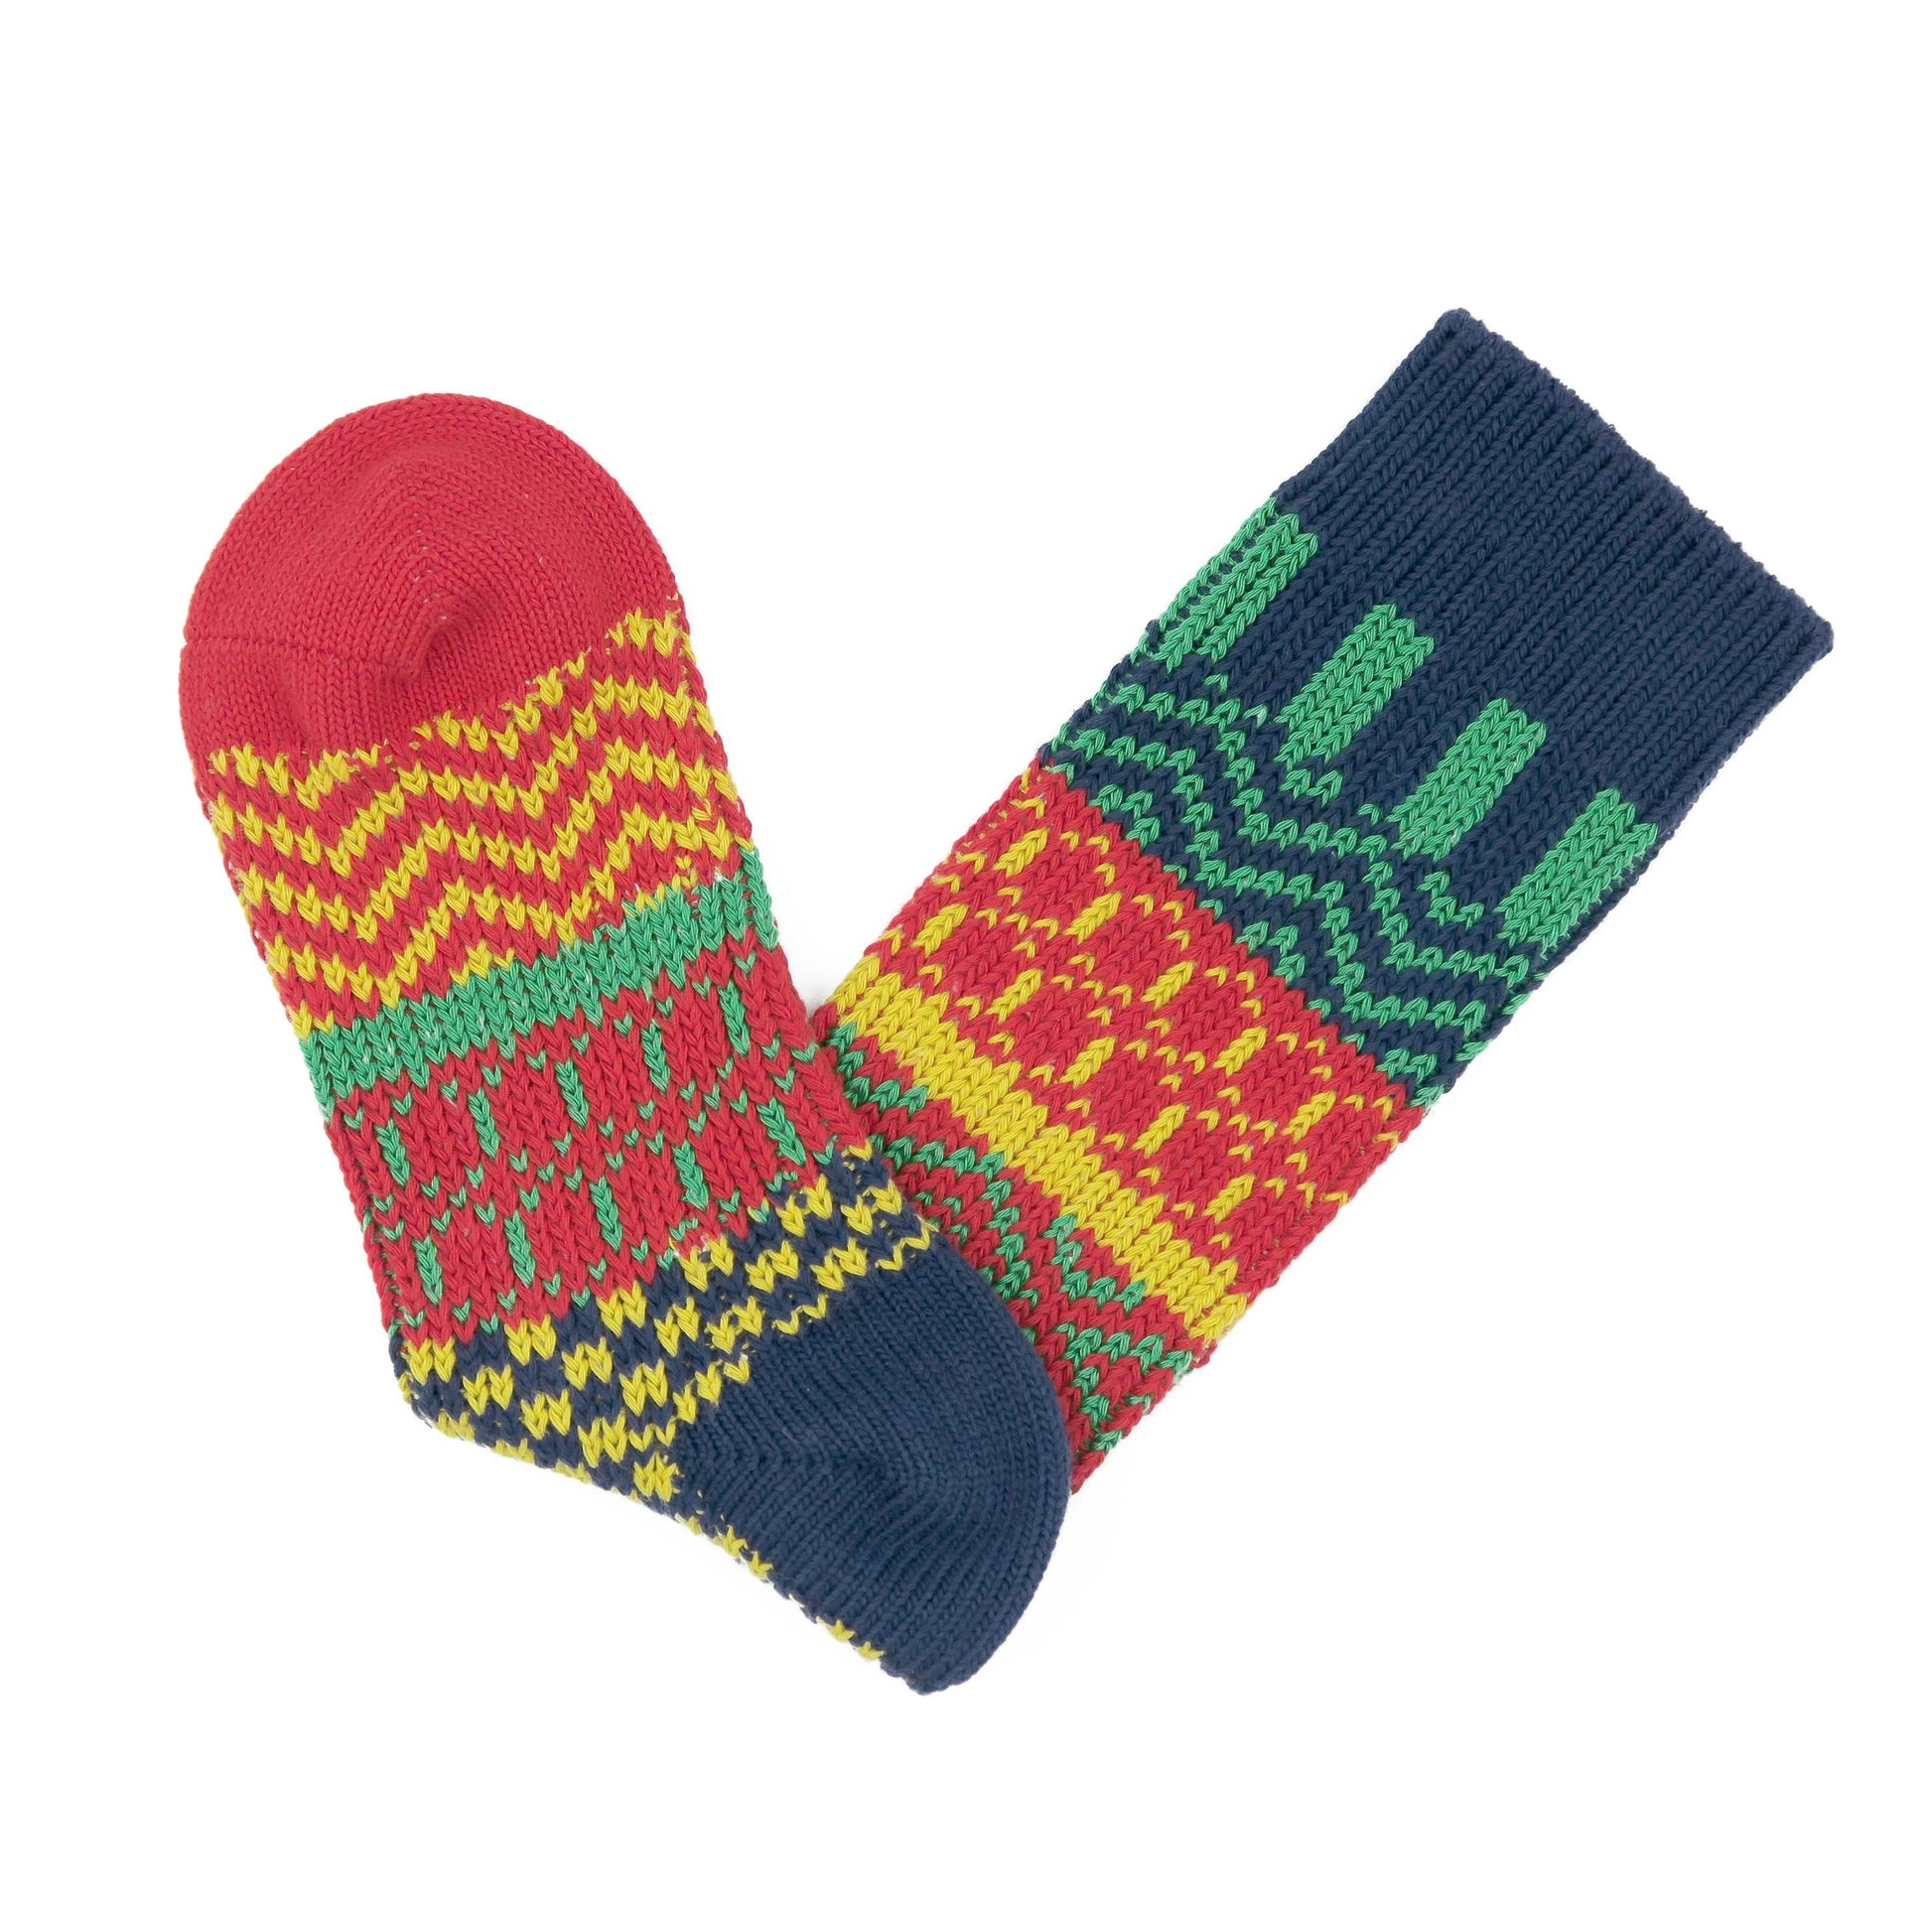 Coyote Sock - Red